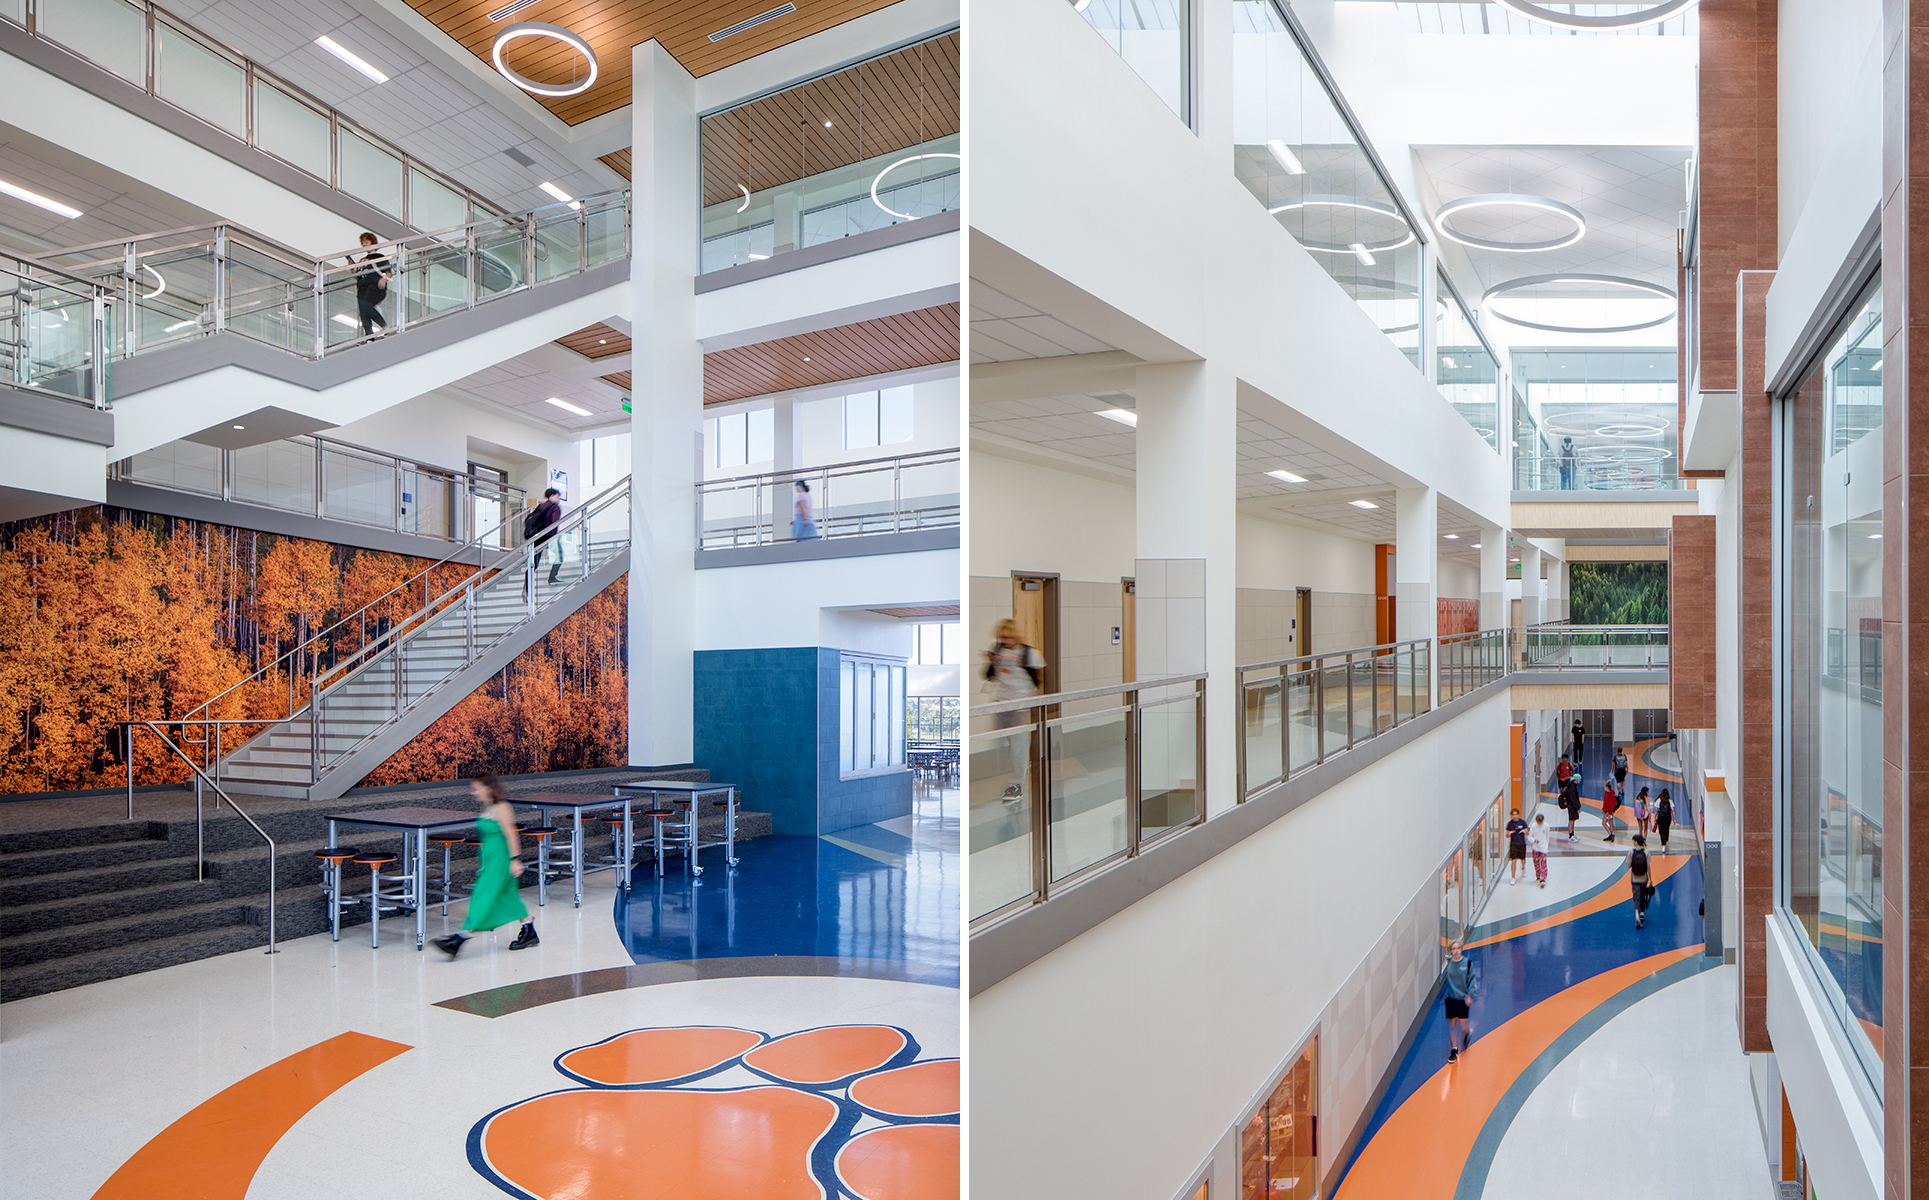 Brighton High School, Sandy, UT.Architectural Photography by Paul Richer / RICHER IMAGES